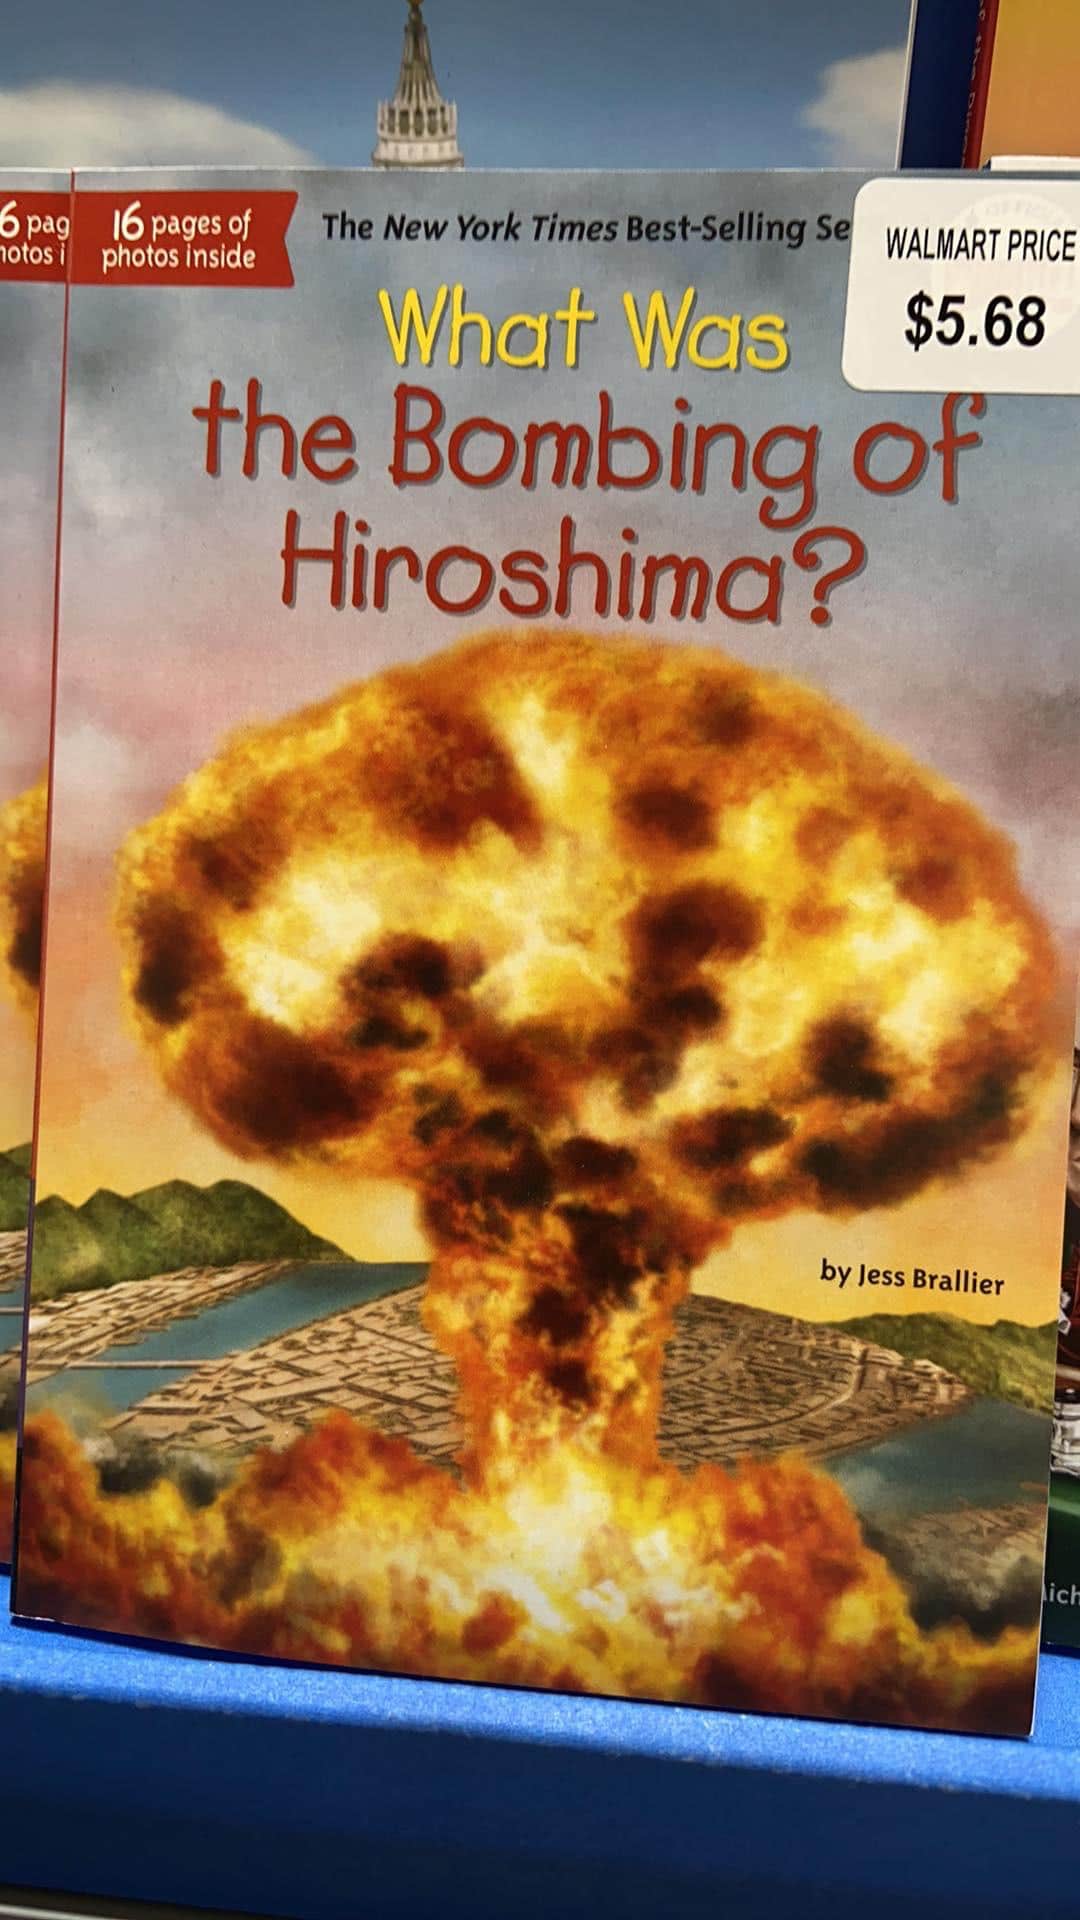 Cringe, New York Times, Manhattan, Hiroshima, Better cringe memes Cringe, New York Times, Manhattan, Hiroshima, Better text: The New York Times Best-selling S WALMART PRICE 'ag 16 pages of )si$ photos inside $5.68 Al\ld13 the Bombing o Hiroshima? by Jess Brallier 